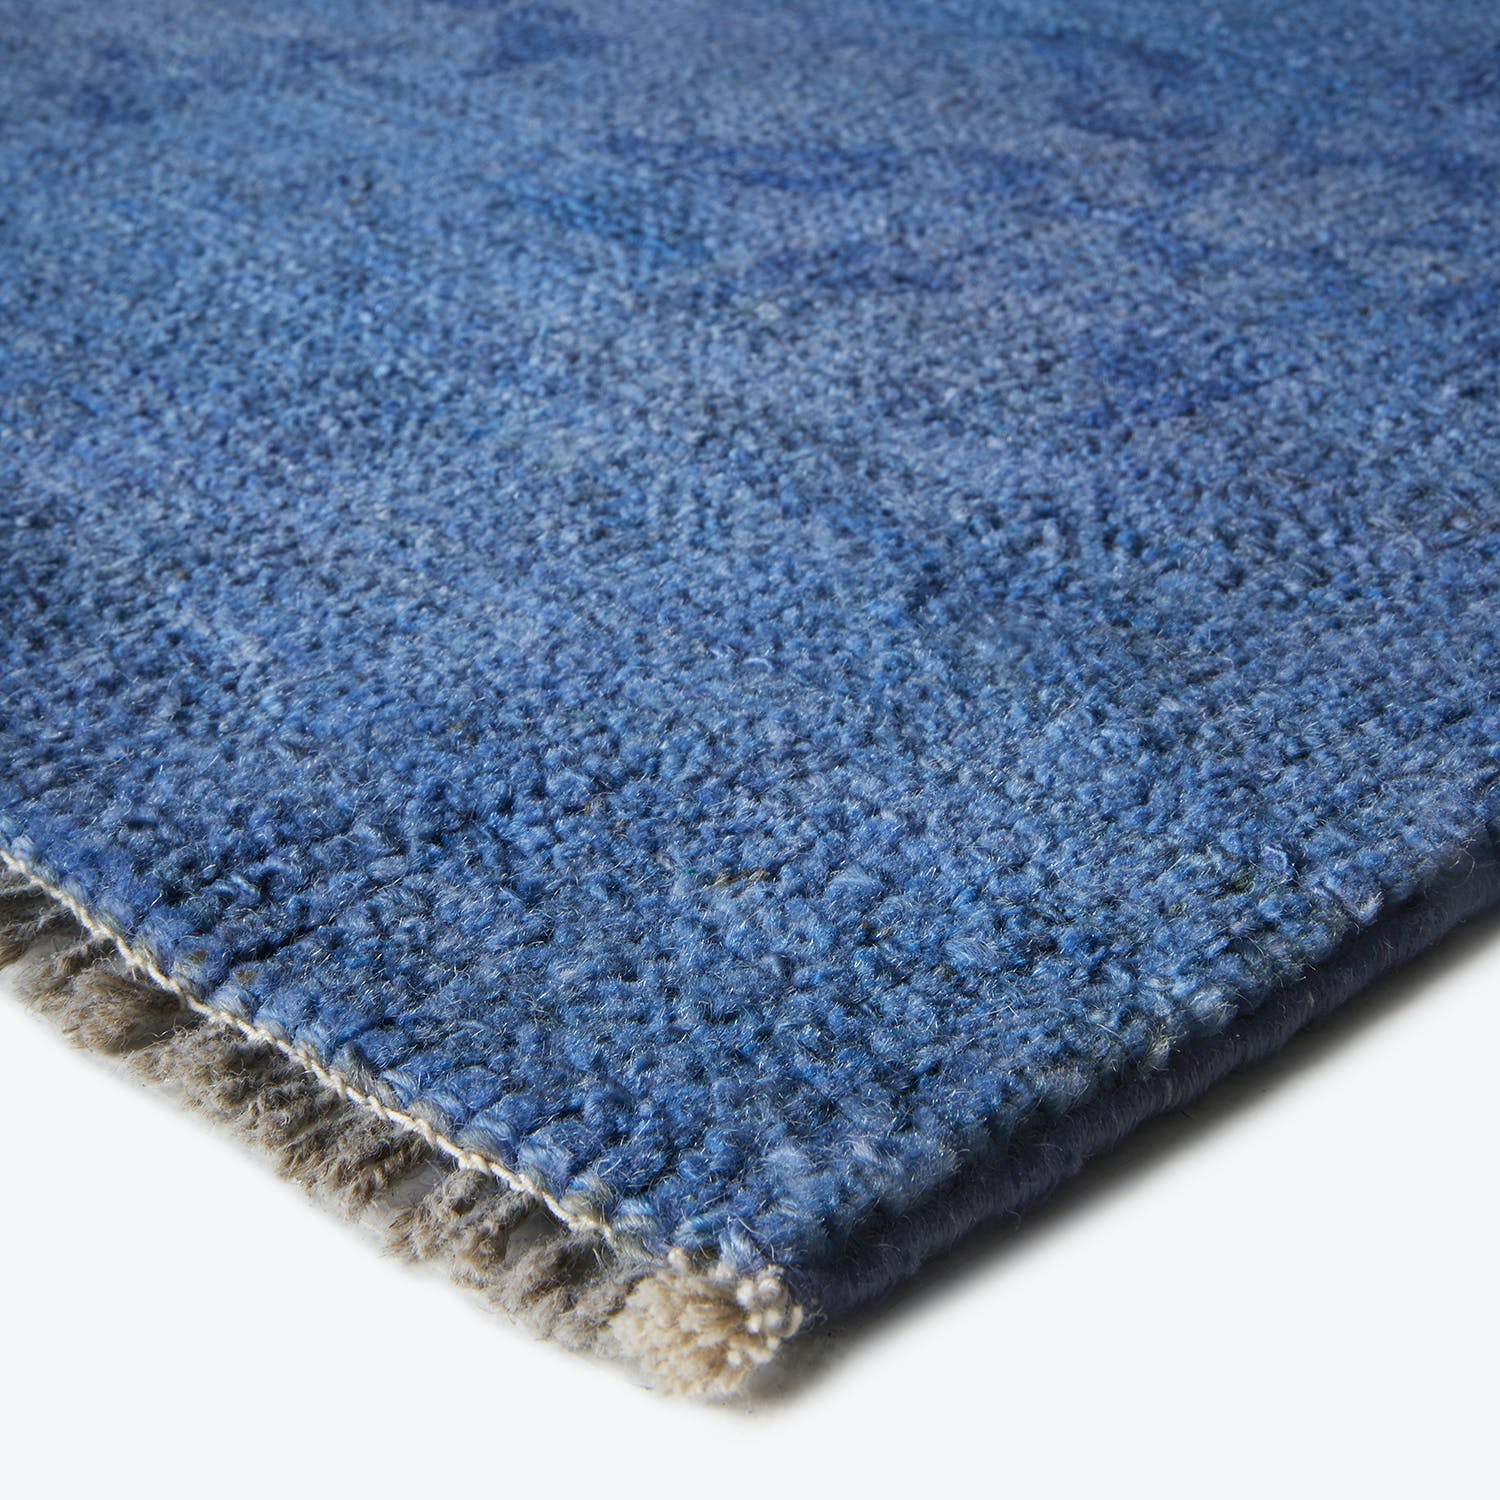 Close-up of a plush blue carpet with distinct texture variations.